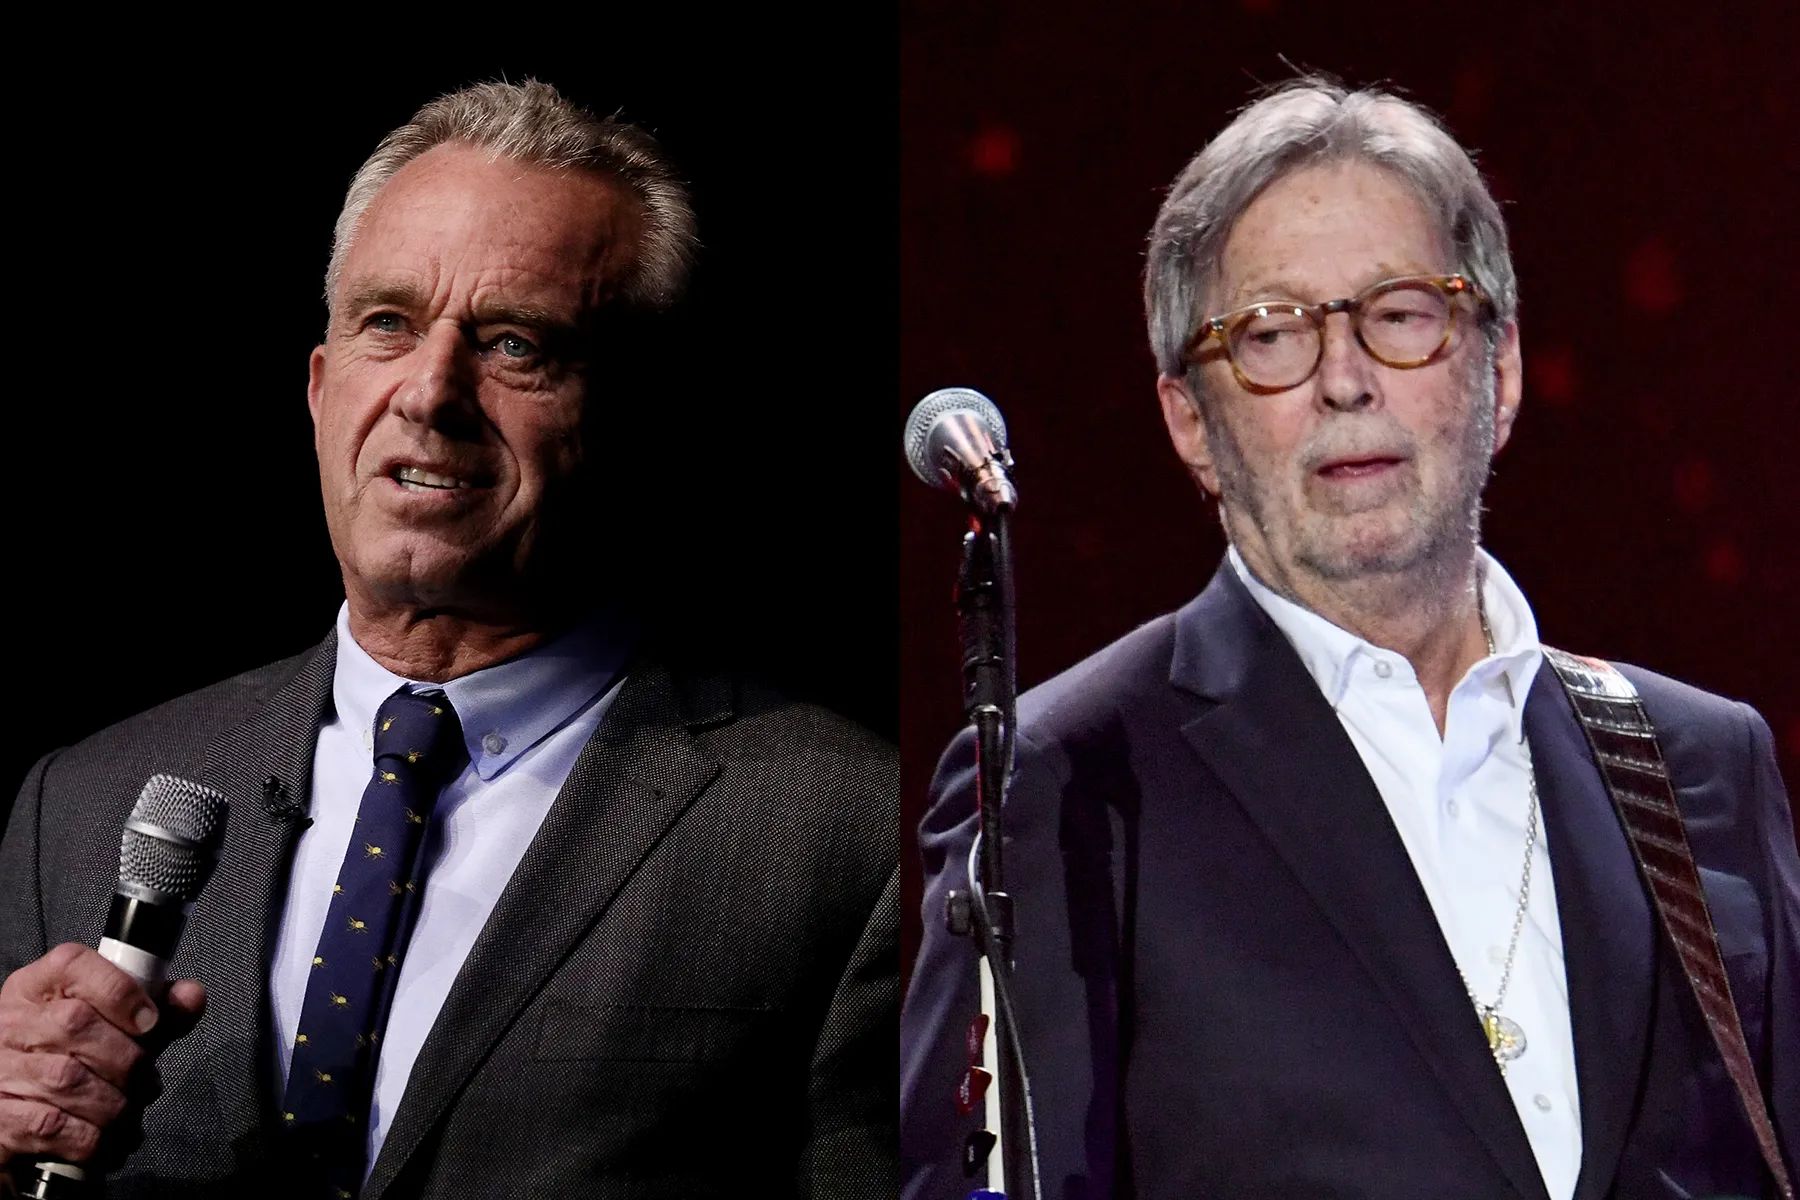 Eric Clapton Raises $2.2 Million For Robert F. Kennedy Jr. Campaign With Private Concert